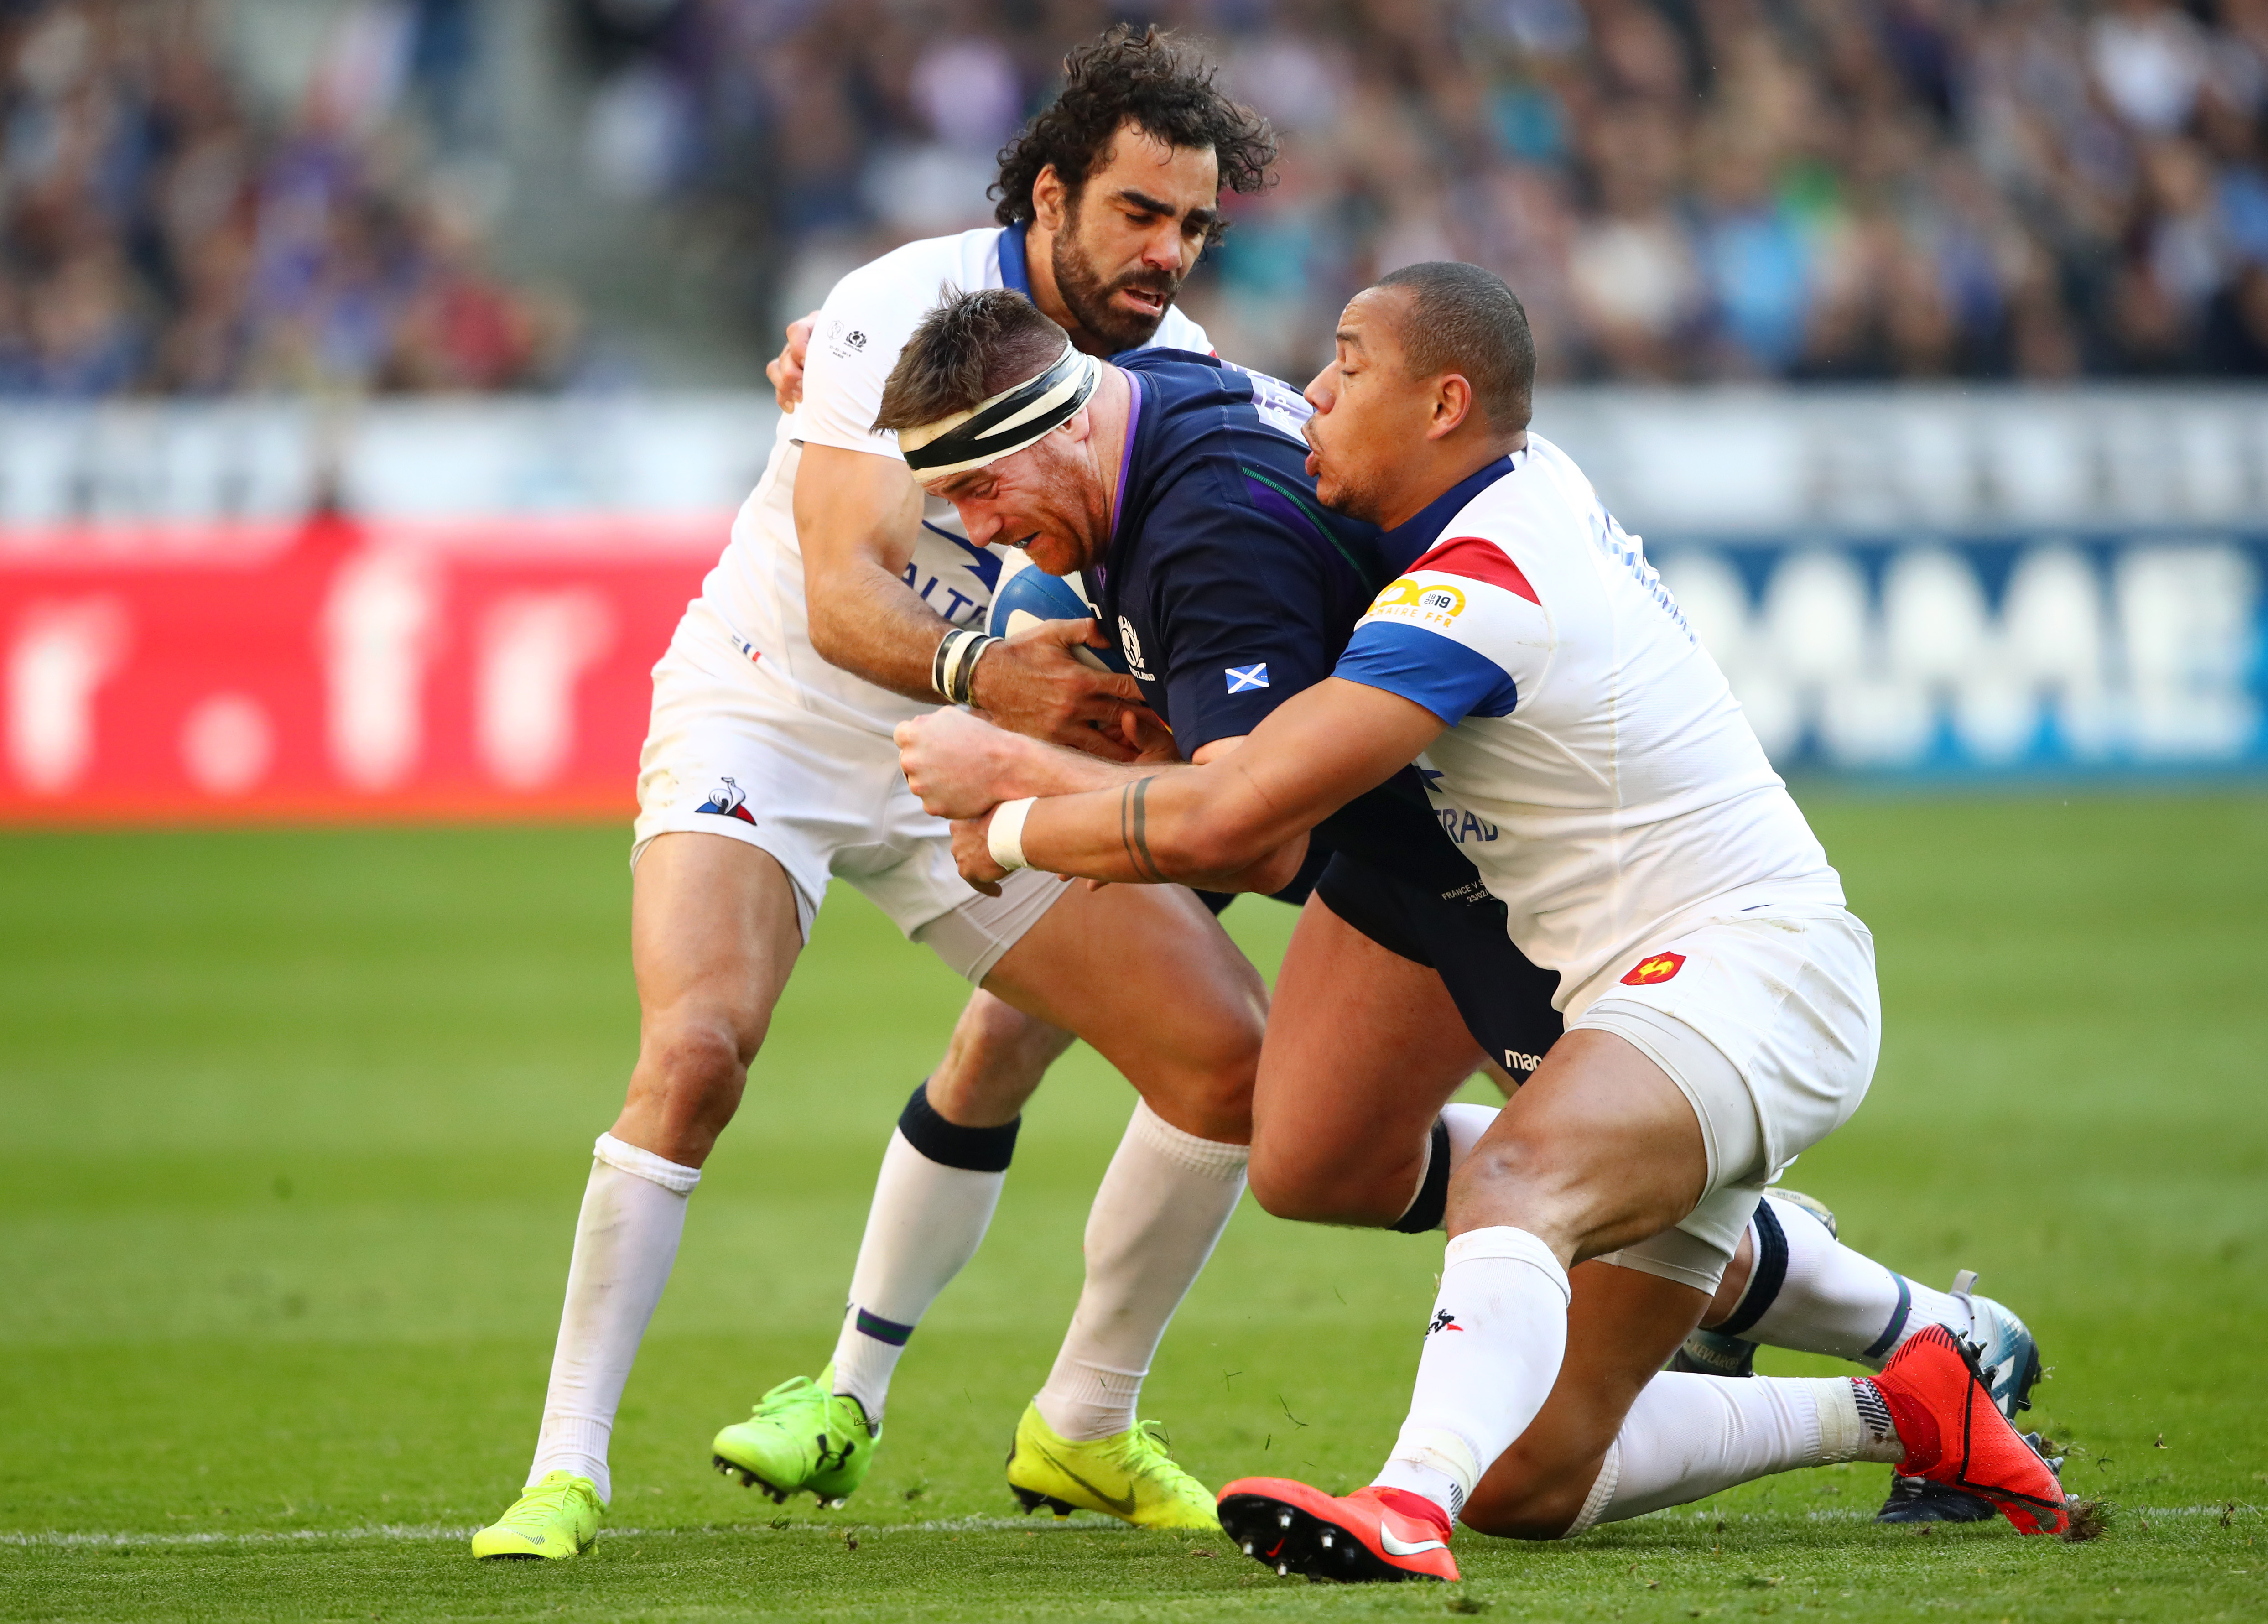 Simon Berghan of Scotland is tackled by Gael Fickou and Yoann Huget in Paris.